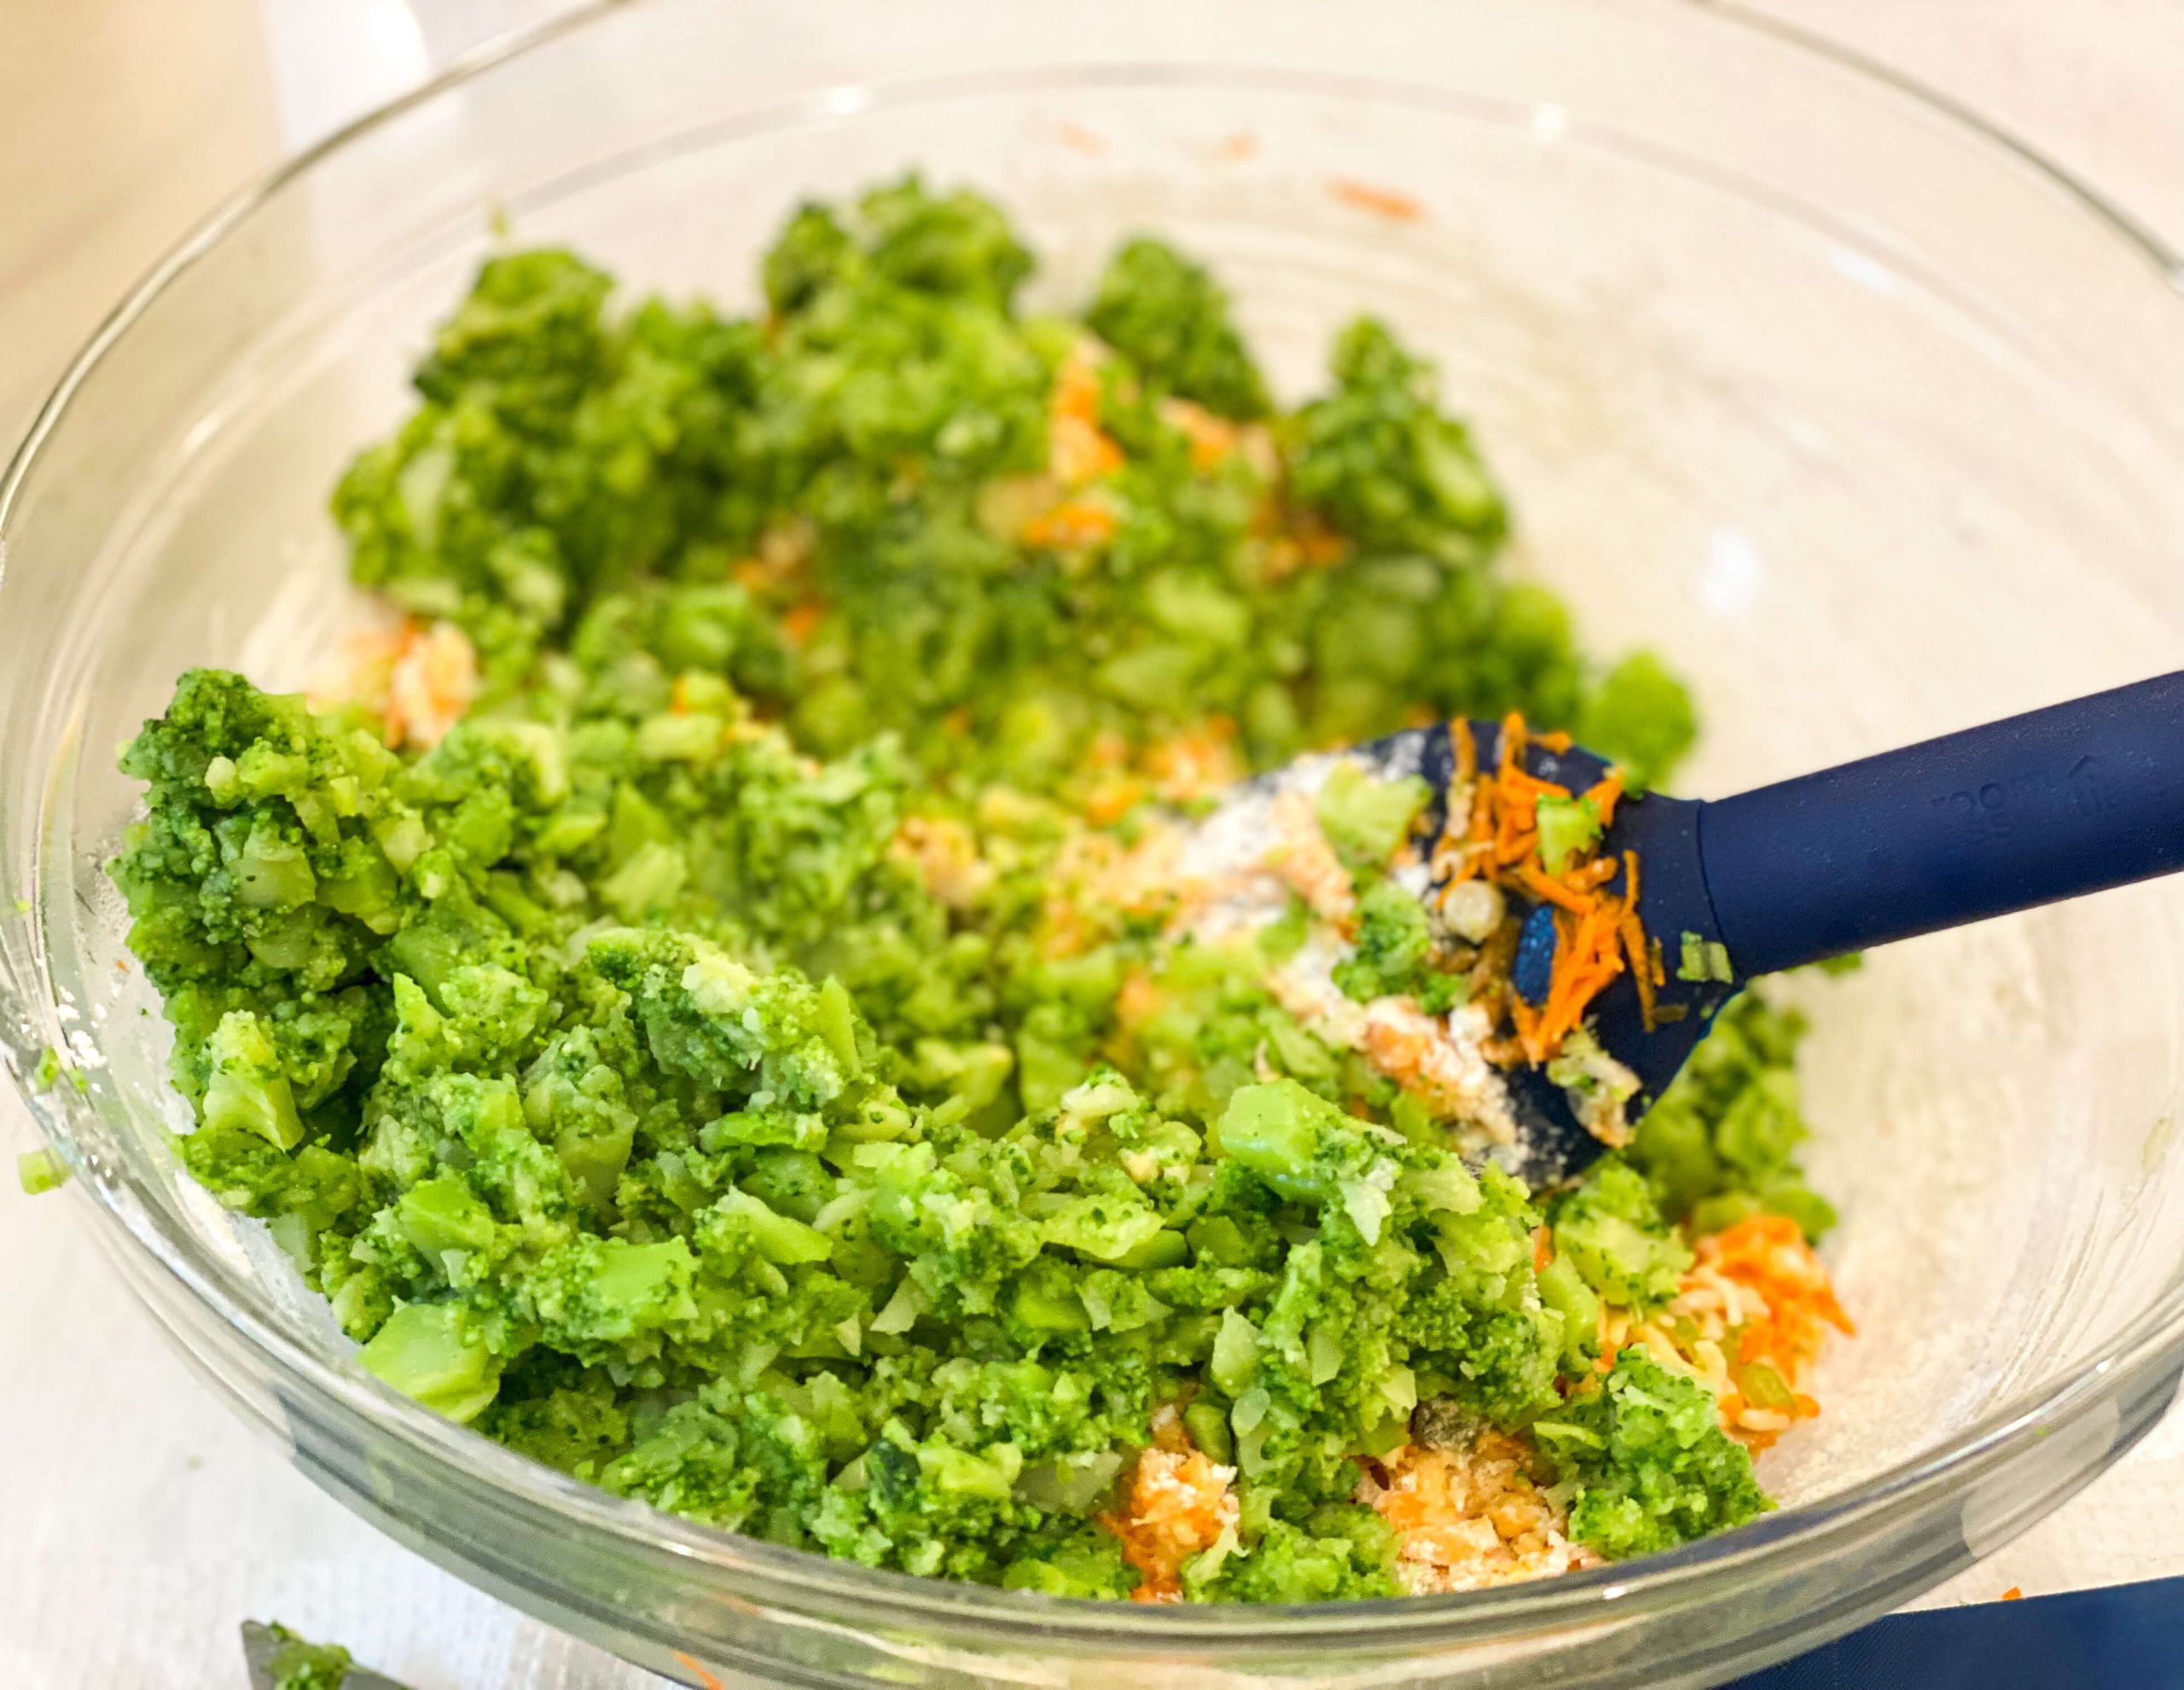 brocoli tossed into flour and carrot mixture